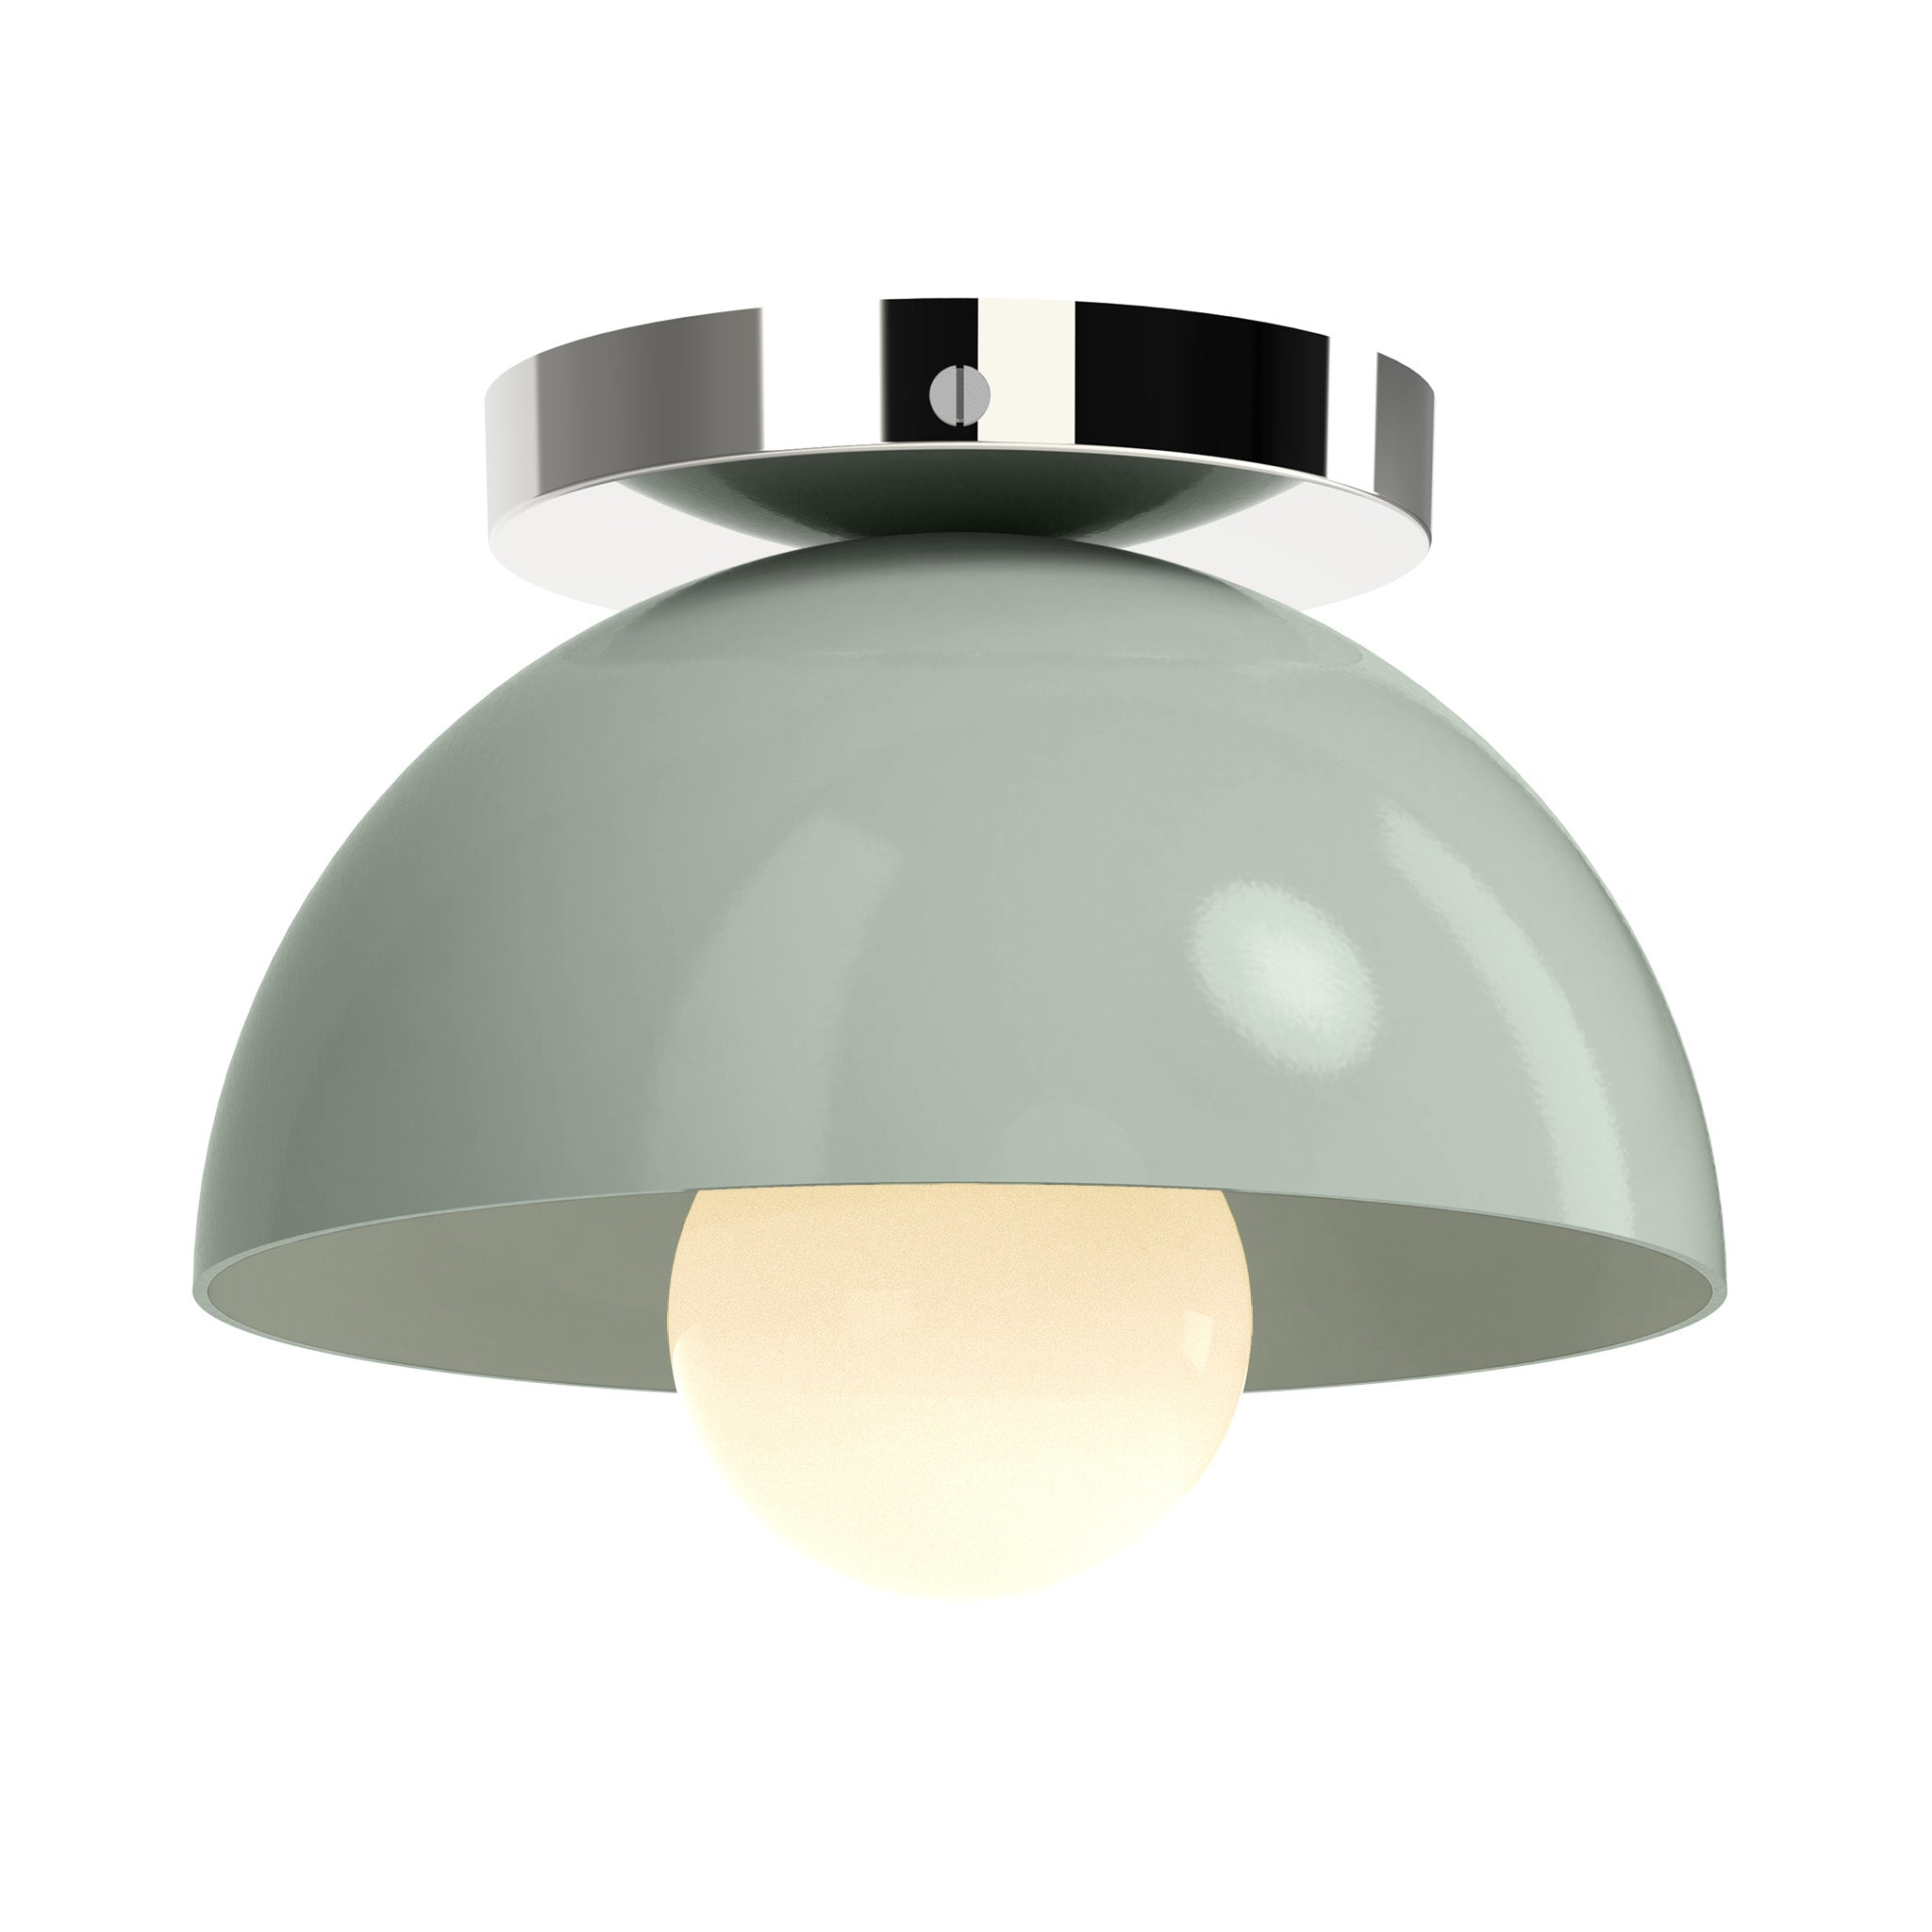 Polished nickel and spa color hemi dome flush mount 8" dutton brown lighting